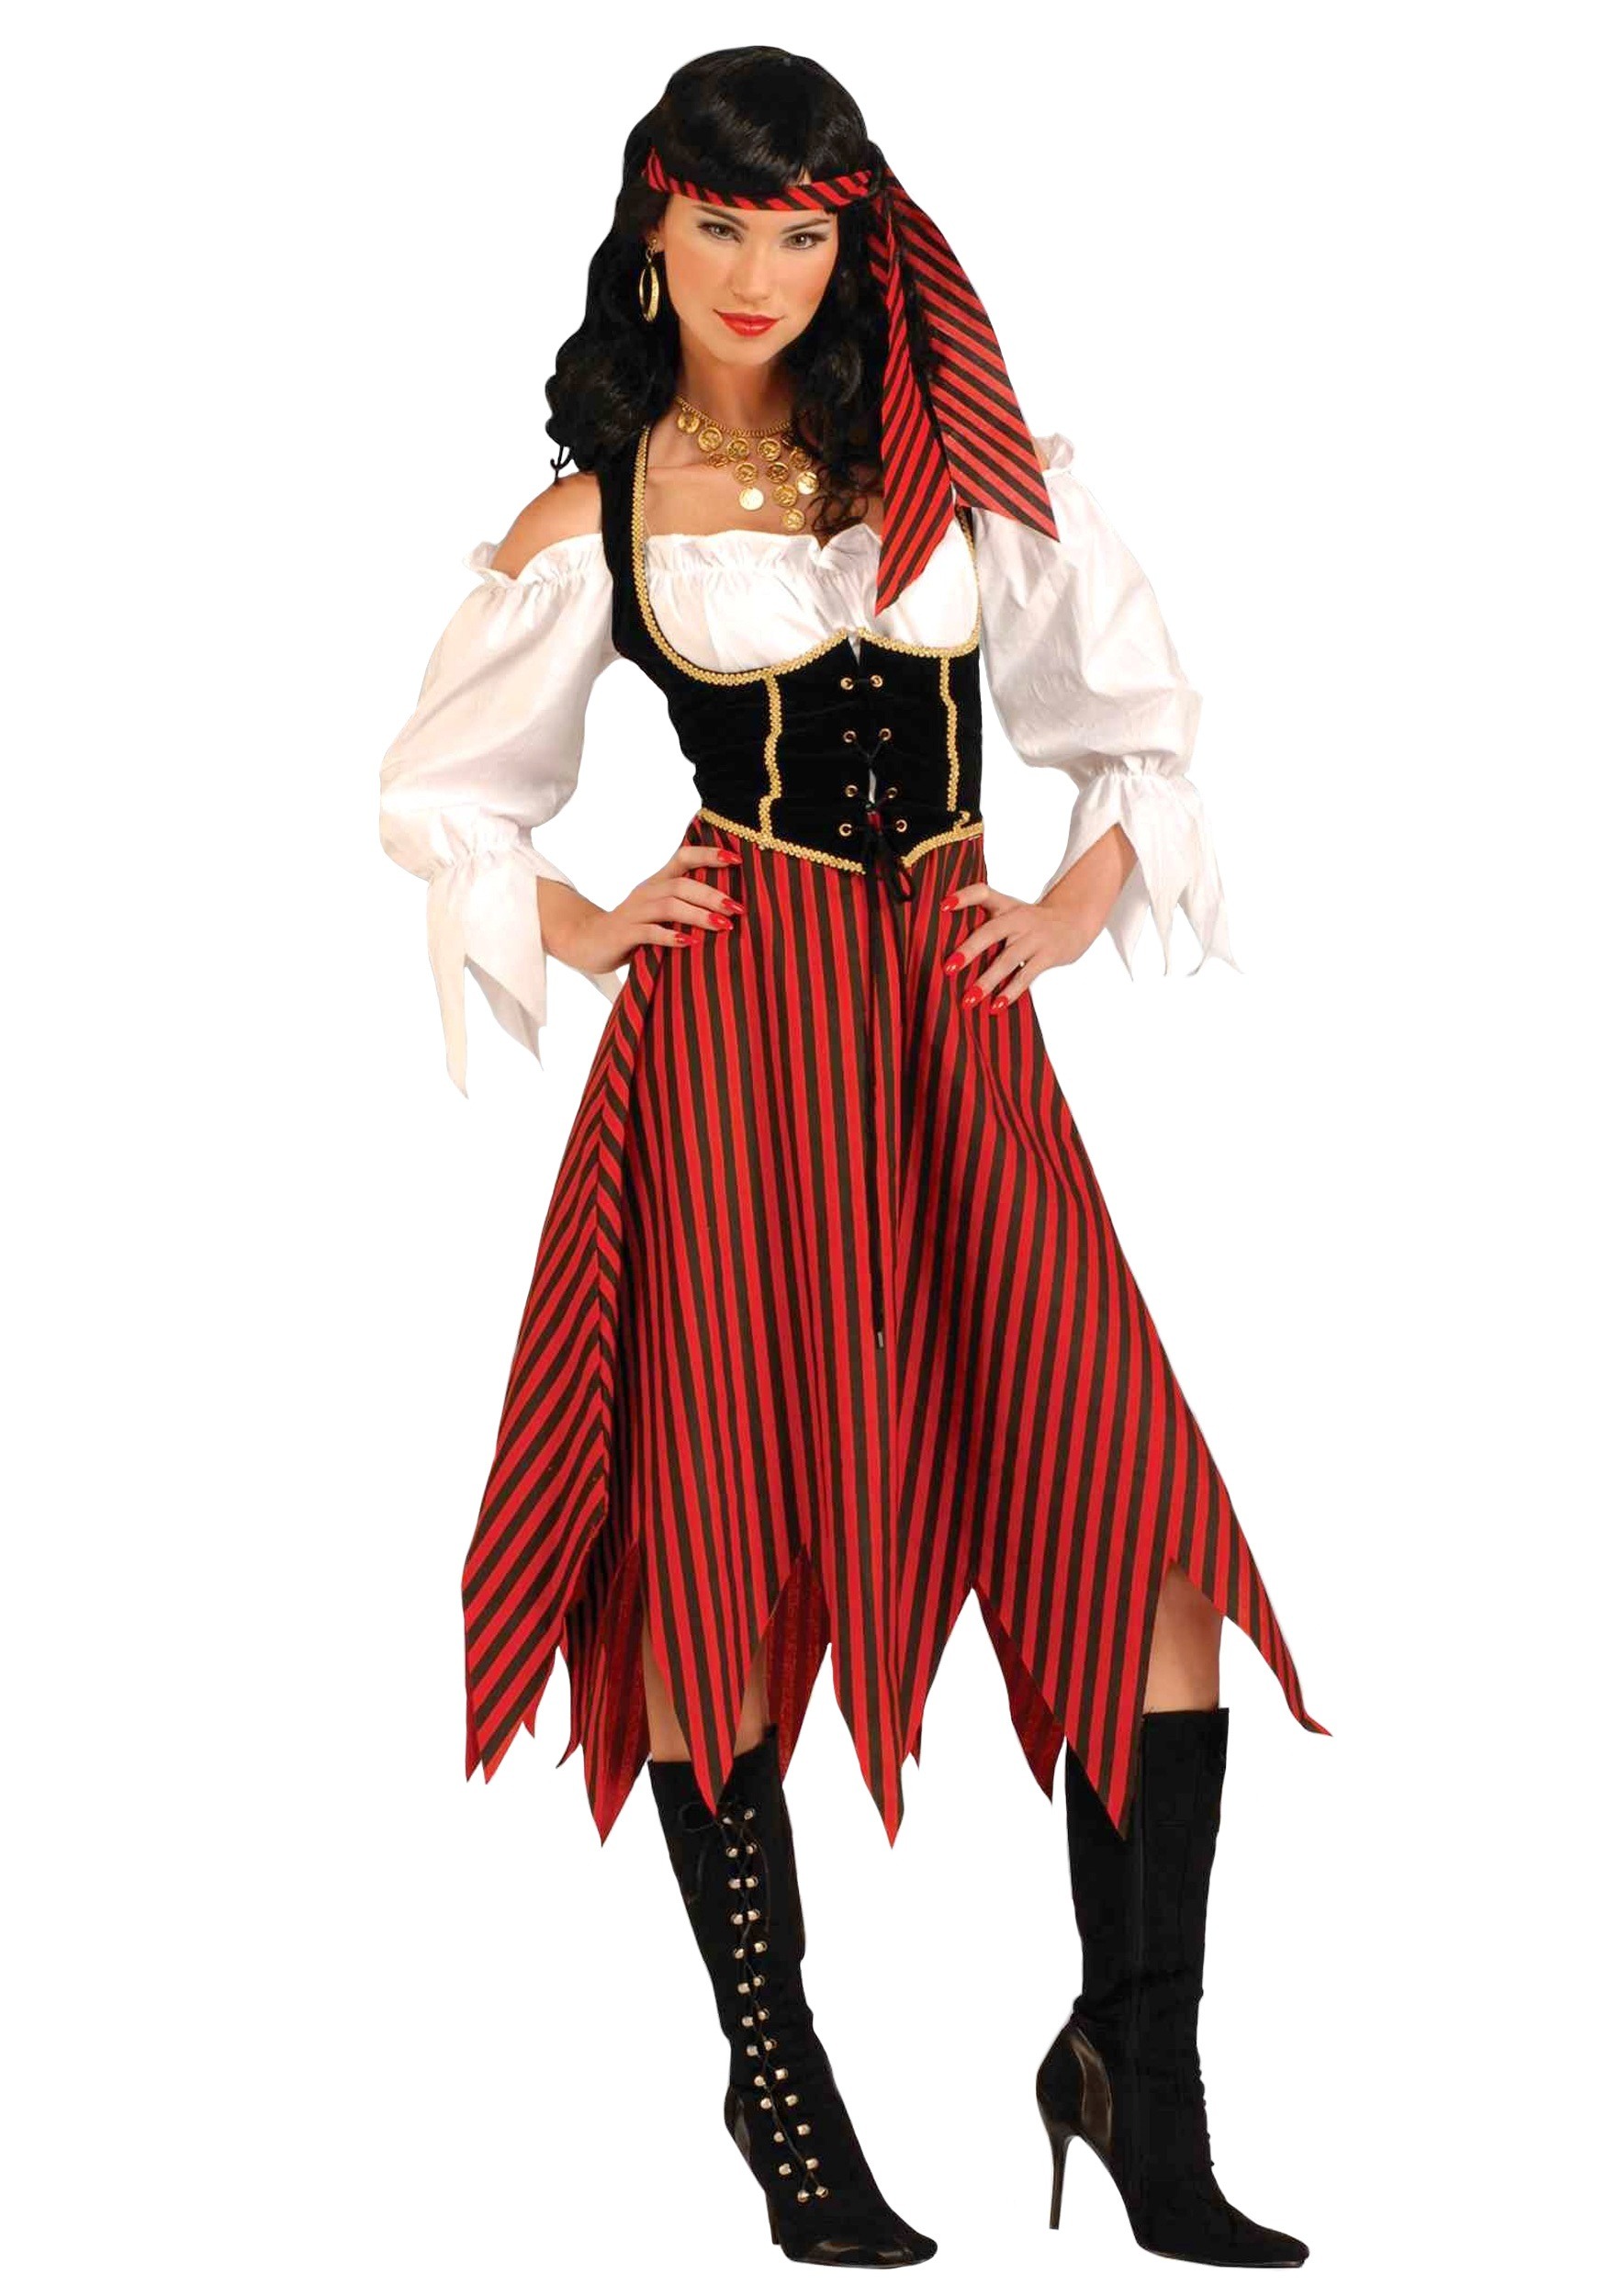 Photos - Fancy Dress Rubies Pirate Maiden Adult Costume Black/Red/White FO60687 